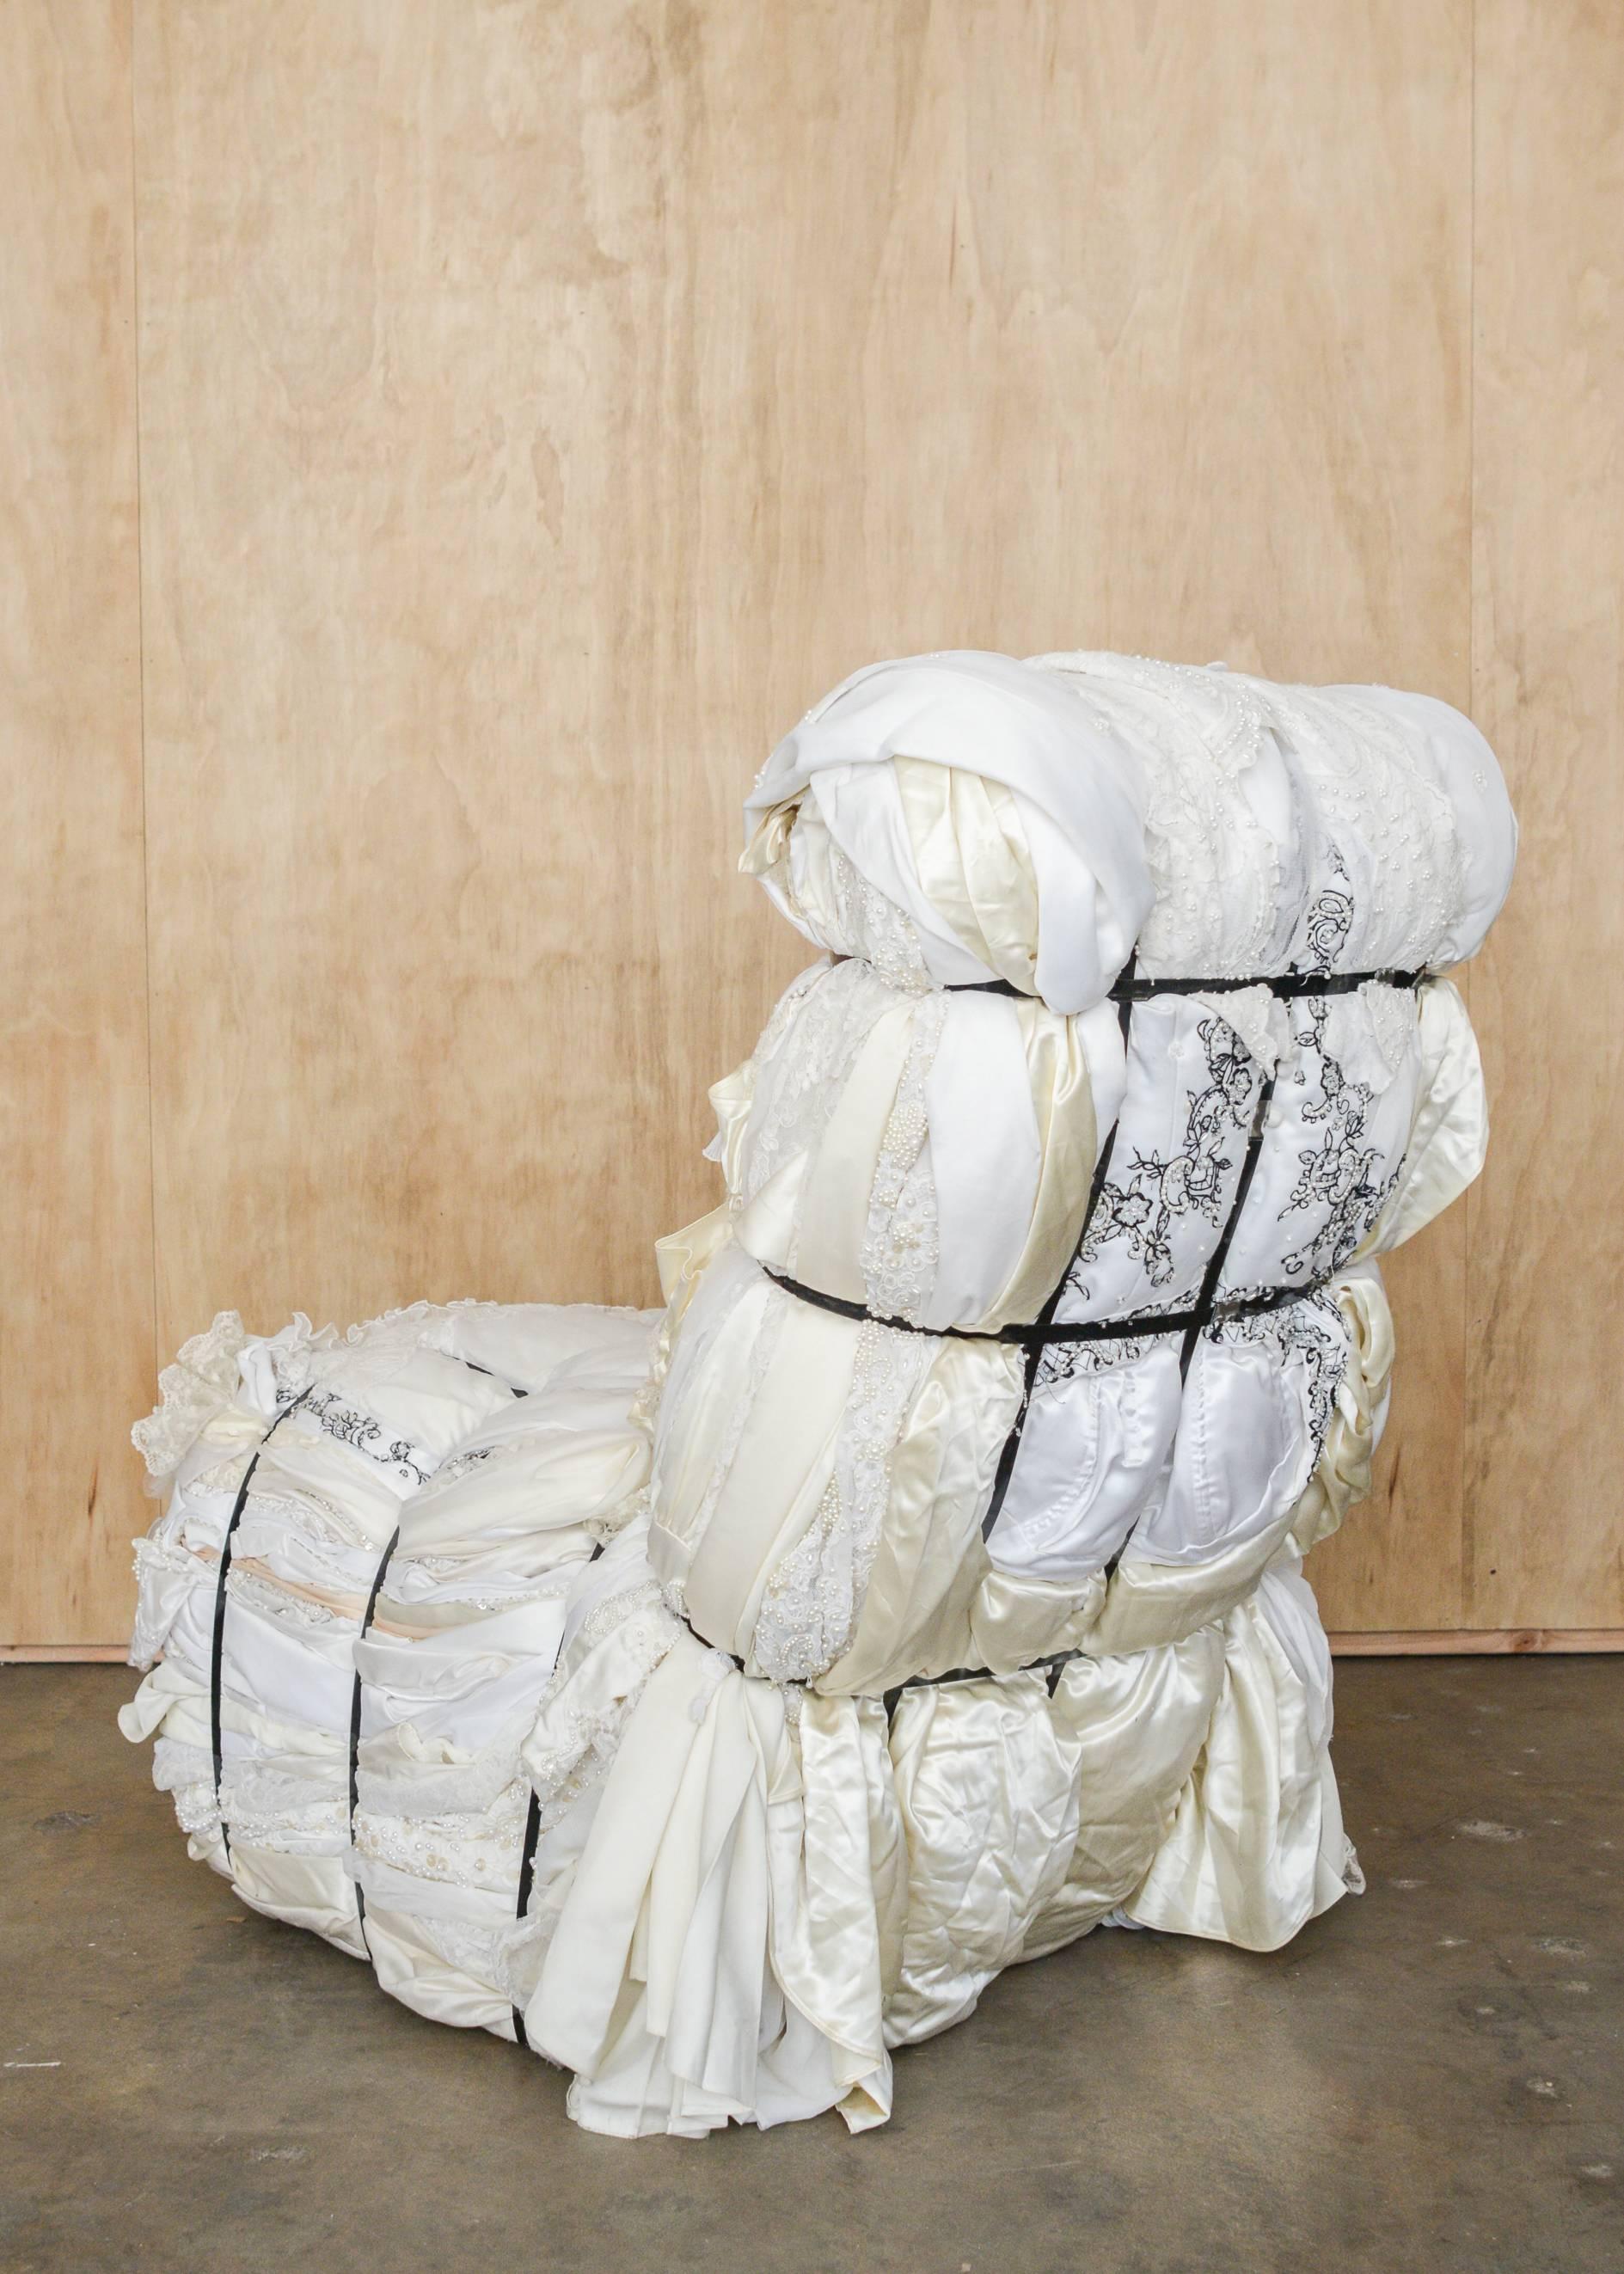 An important custom ordered Tejo Remy (Dutch b. 1960) rag chair for Droog design. One of a kind and individually handcrafted from 100+ pounds of customer supplied wedding dresses bound with steel straps.